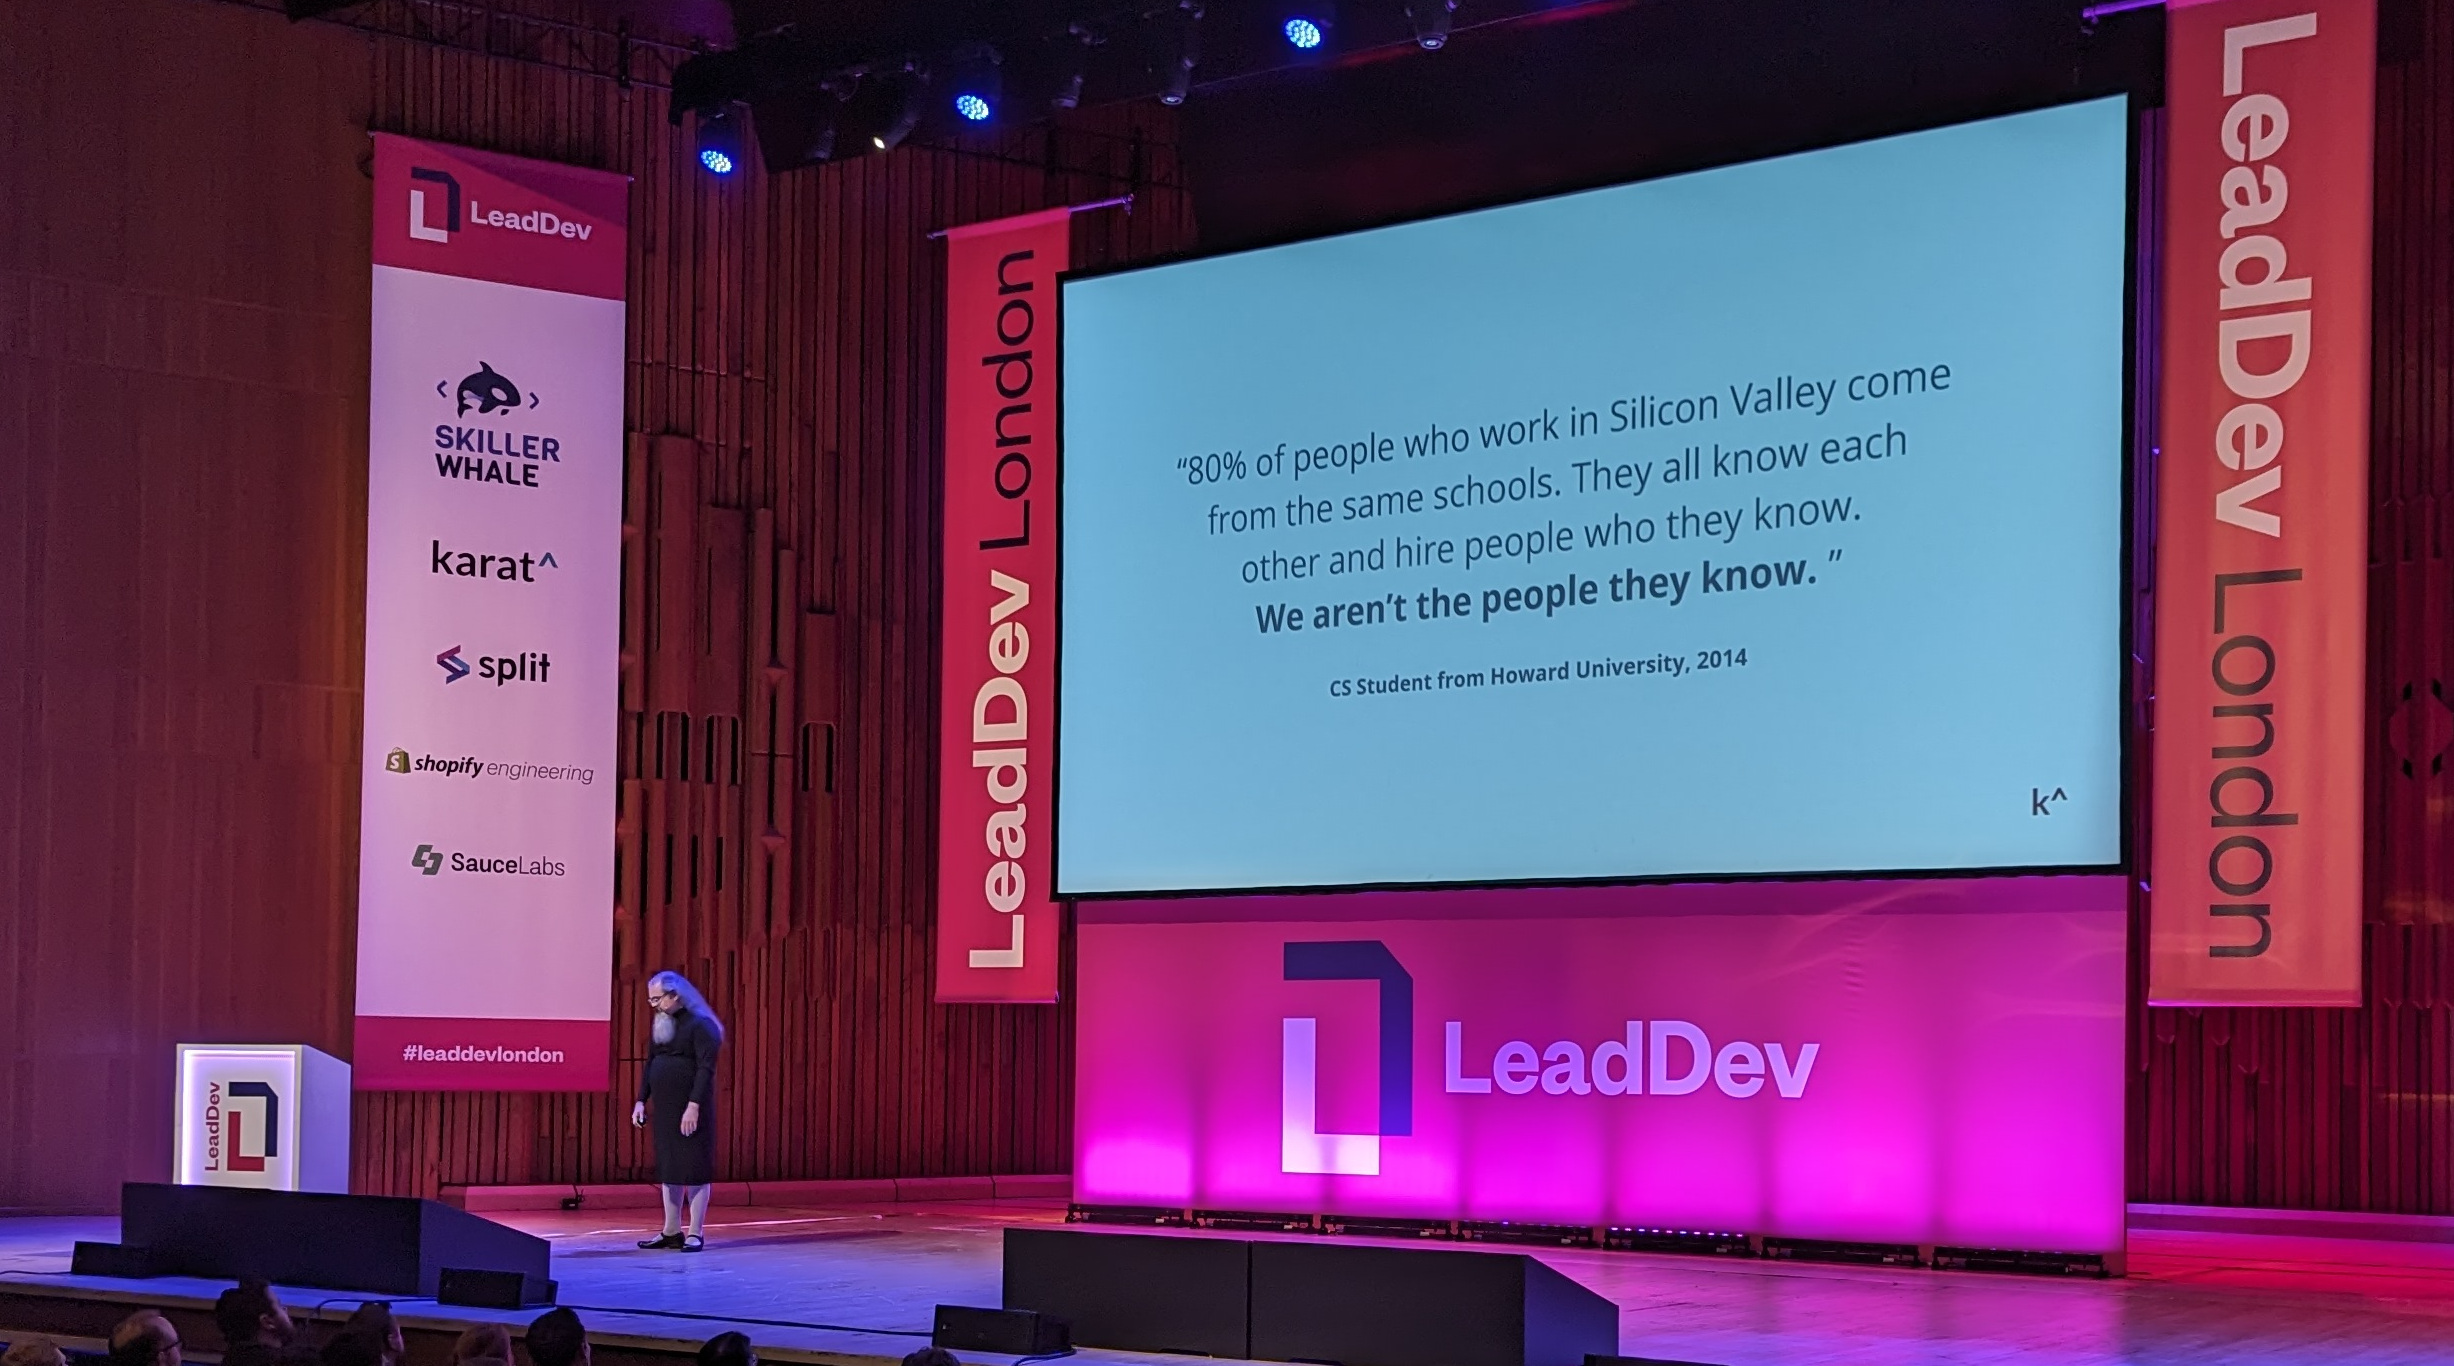 Jason standing on the stage at LeadDev London, in front of a slide with a quote by a CS Student from Howard University from 2014, "80% of the people who work in Silicon Valley come from the same schools. They all know each other and hire people who they know. We aren't the people they know"